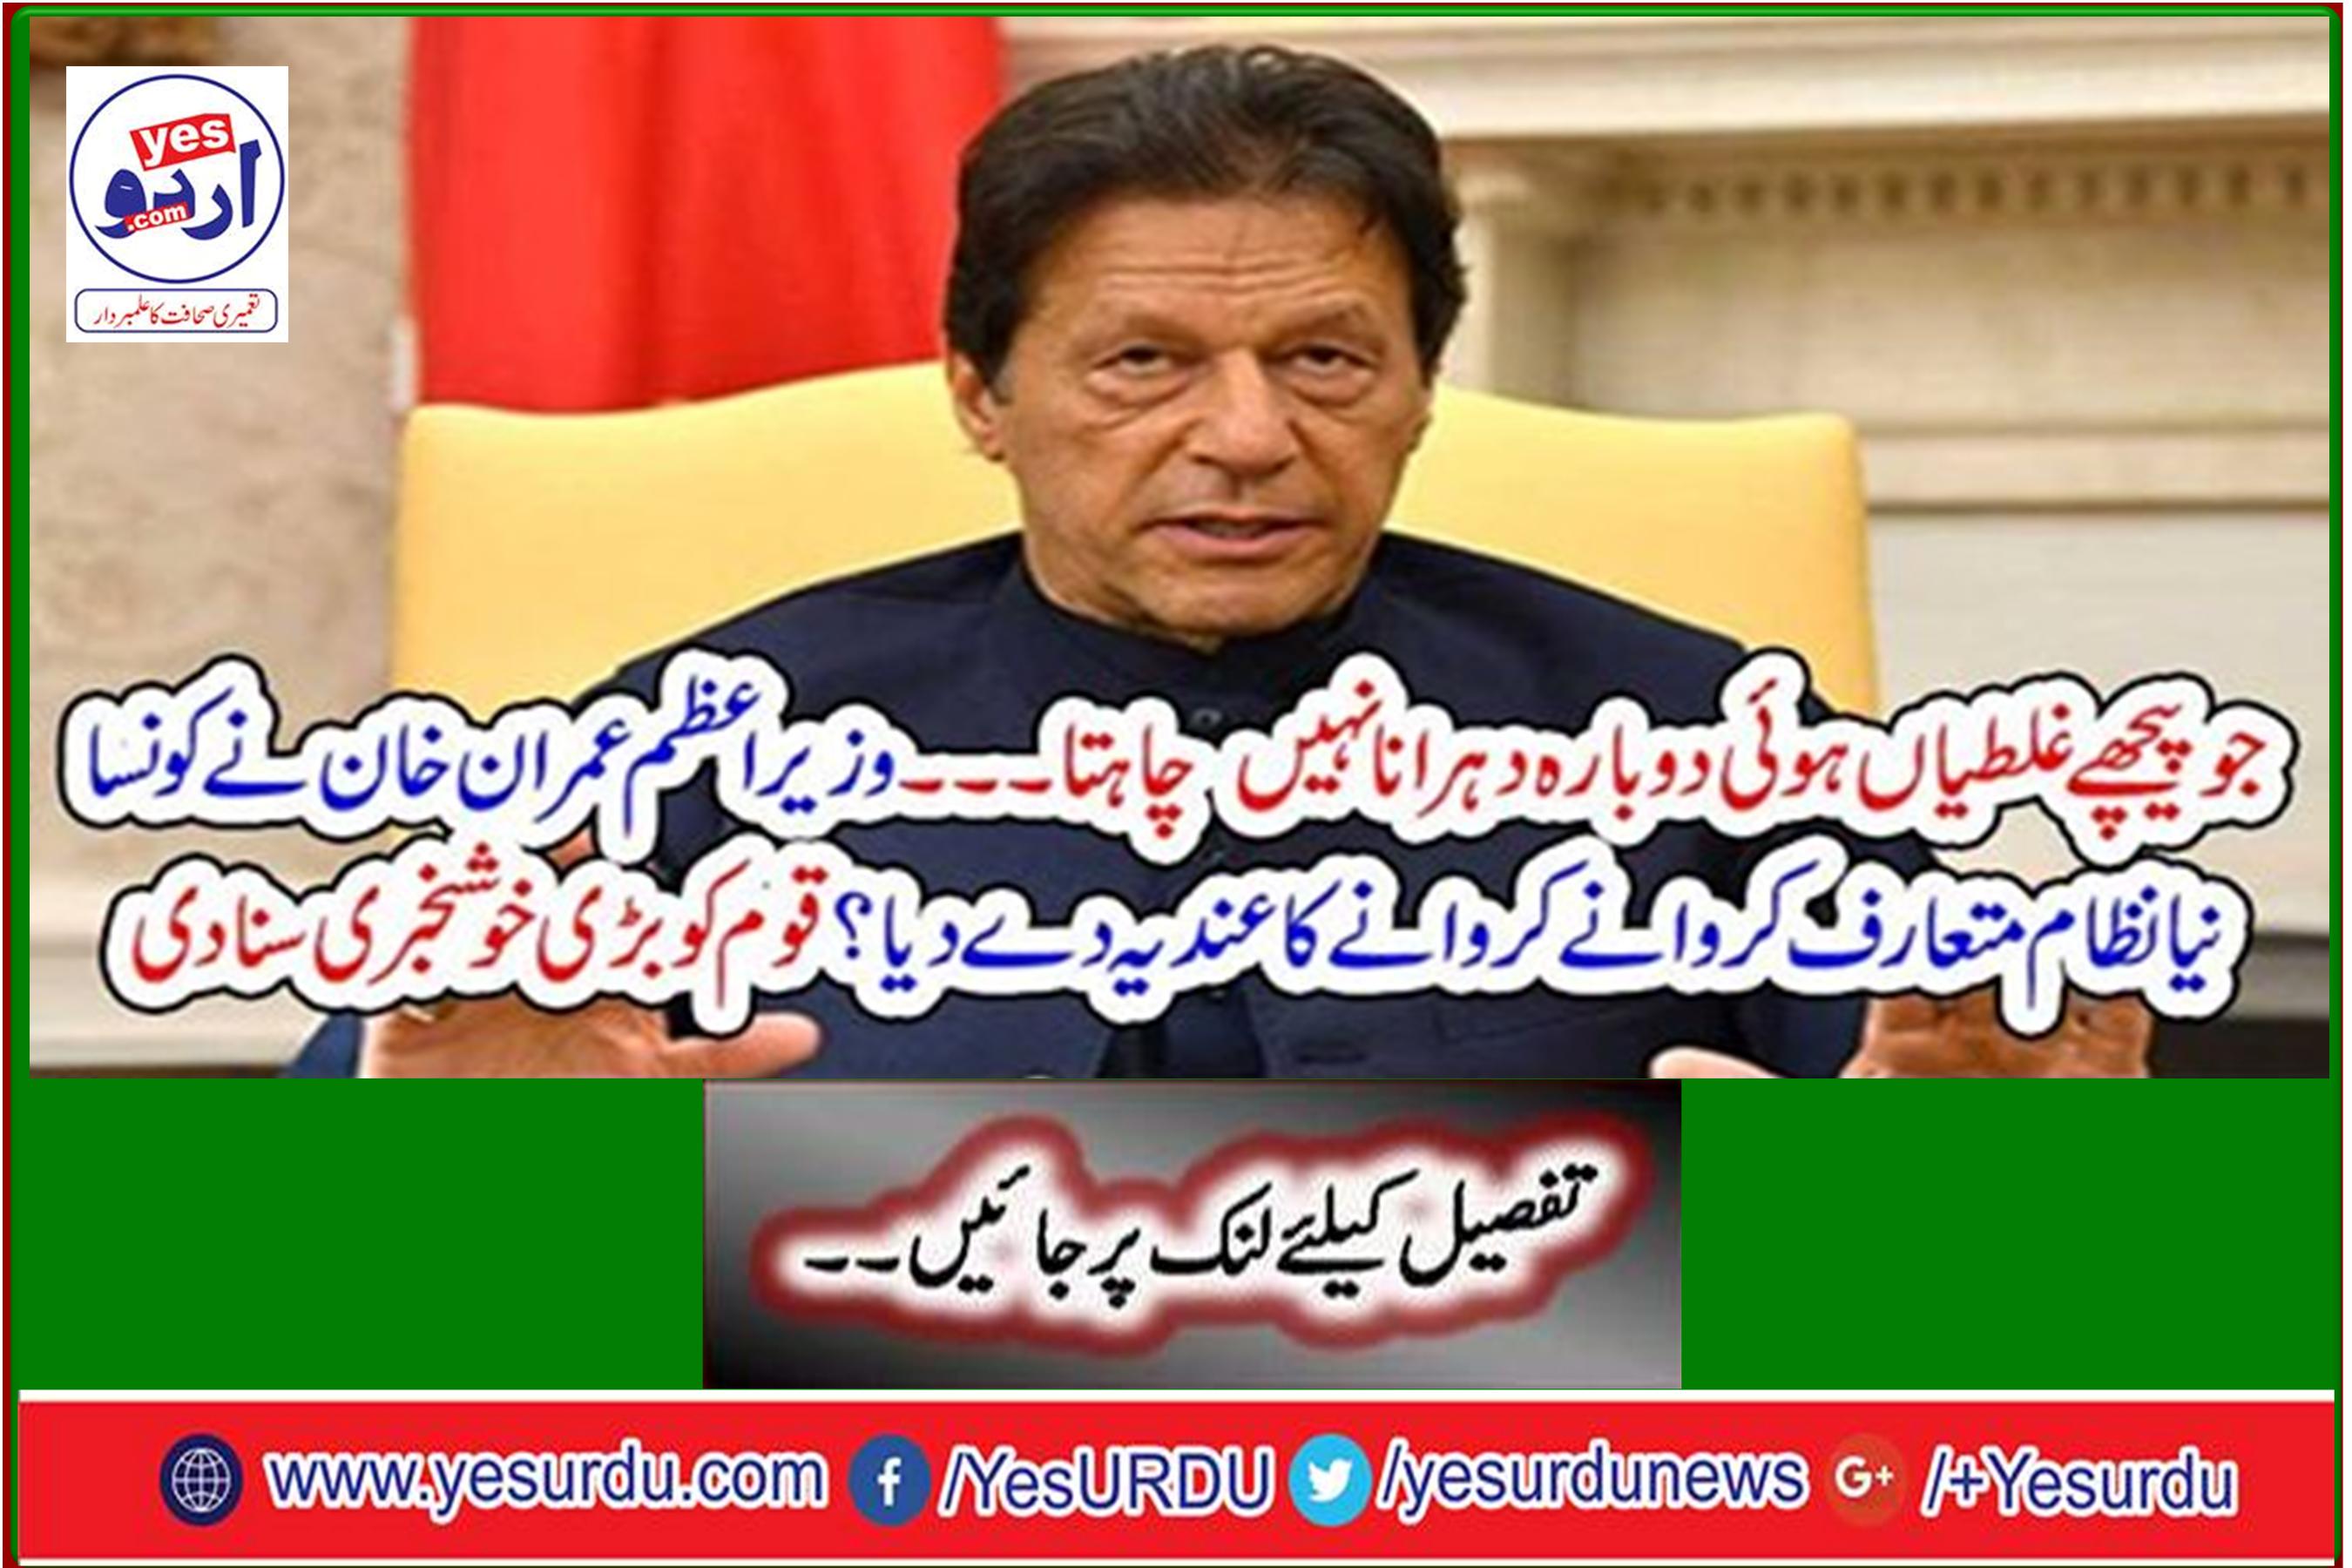 What new system is Prime Minister Imran Khan hinting at? The nation heard the great news